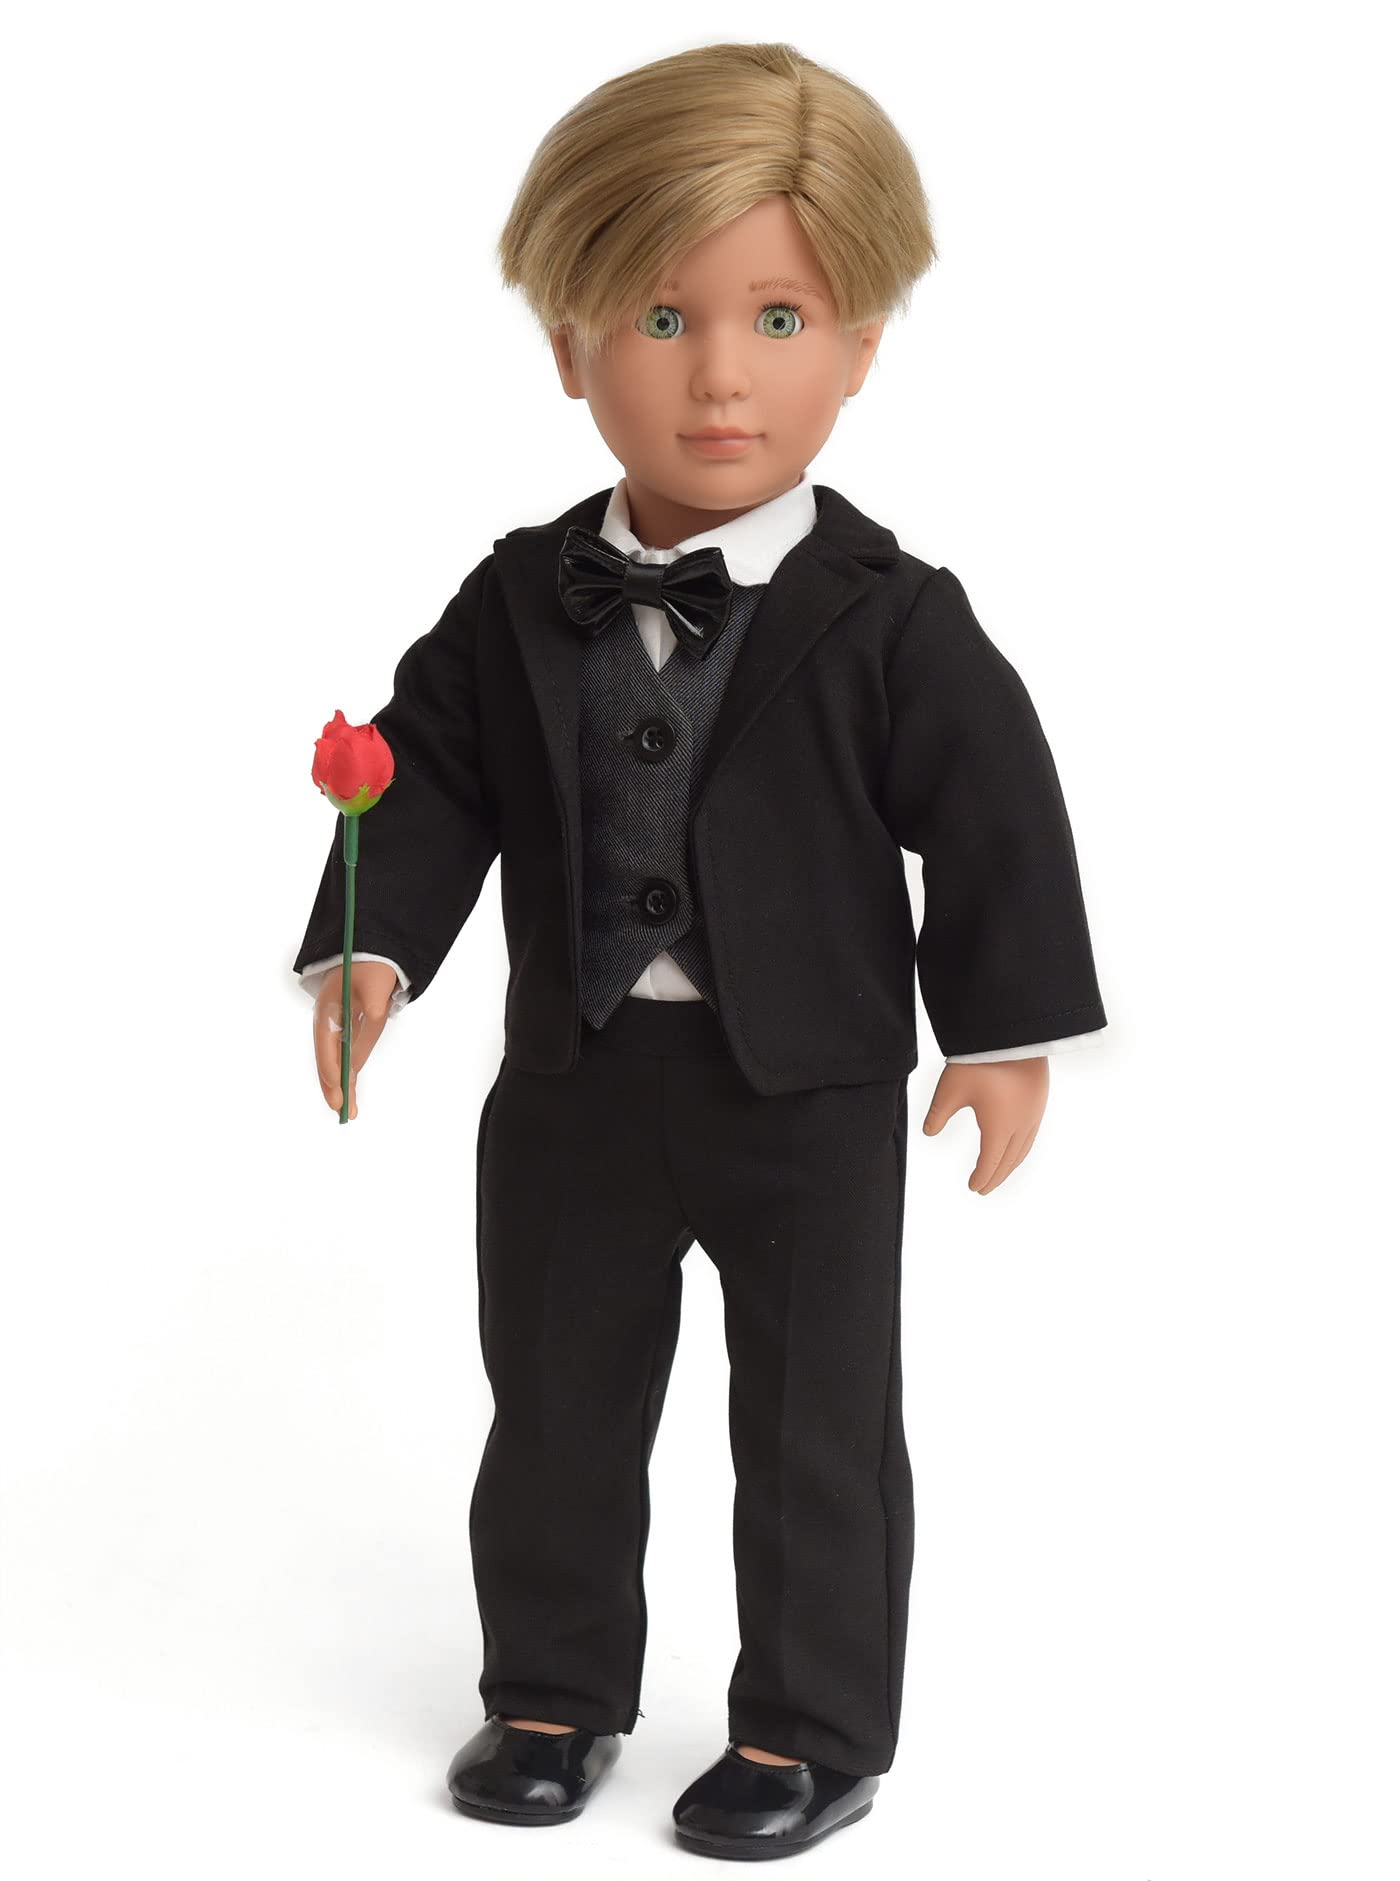 Sweet Dolly Doll Clothes Wedding Suit Set Rose Gentleman Outfits Fit American 18 Inch Boy Dolls